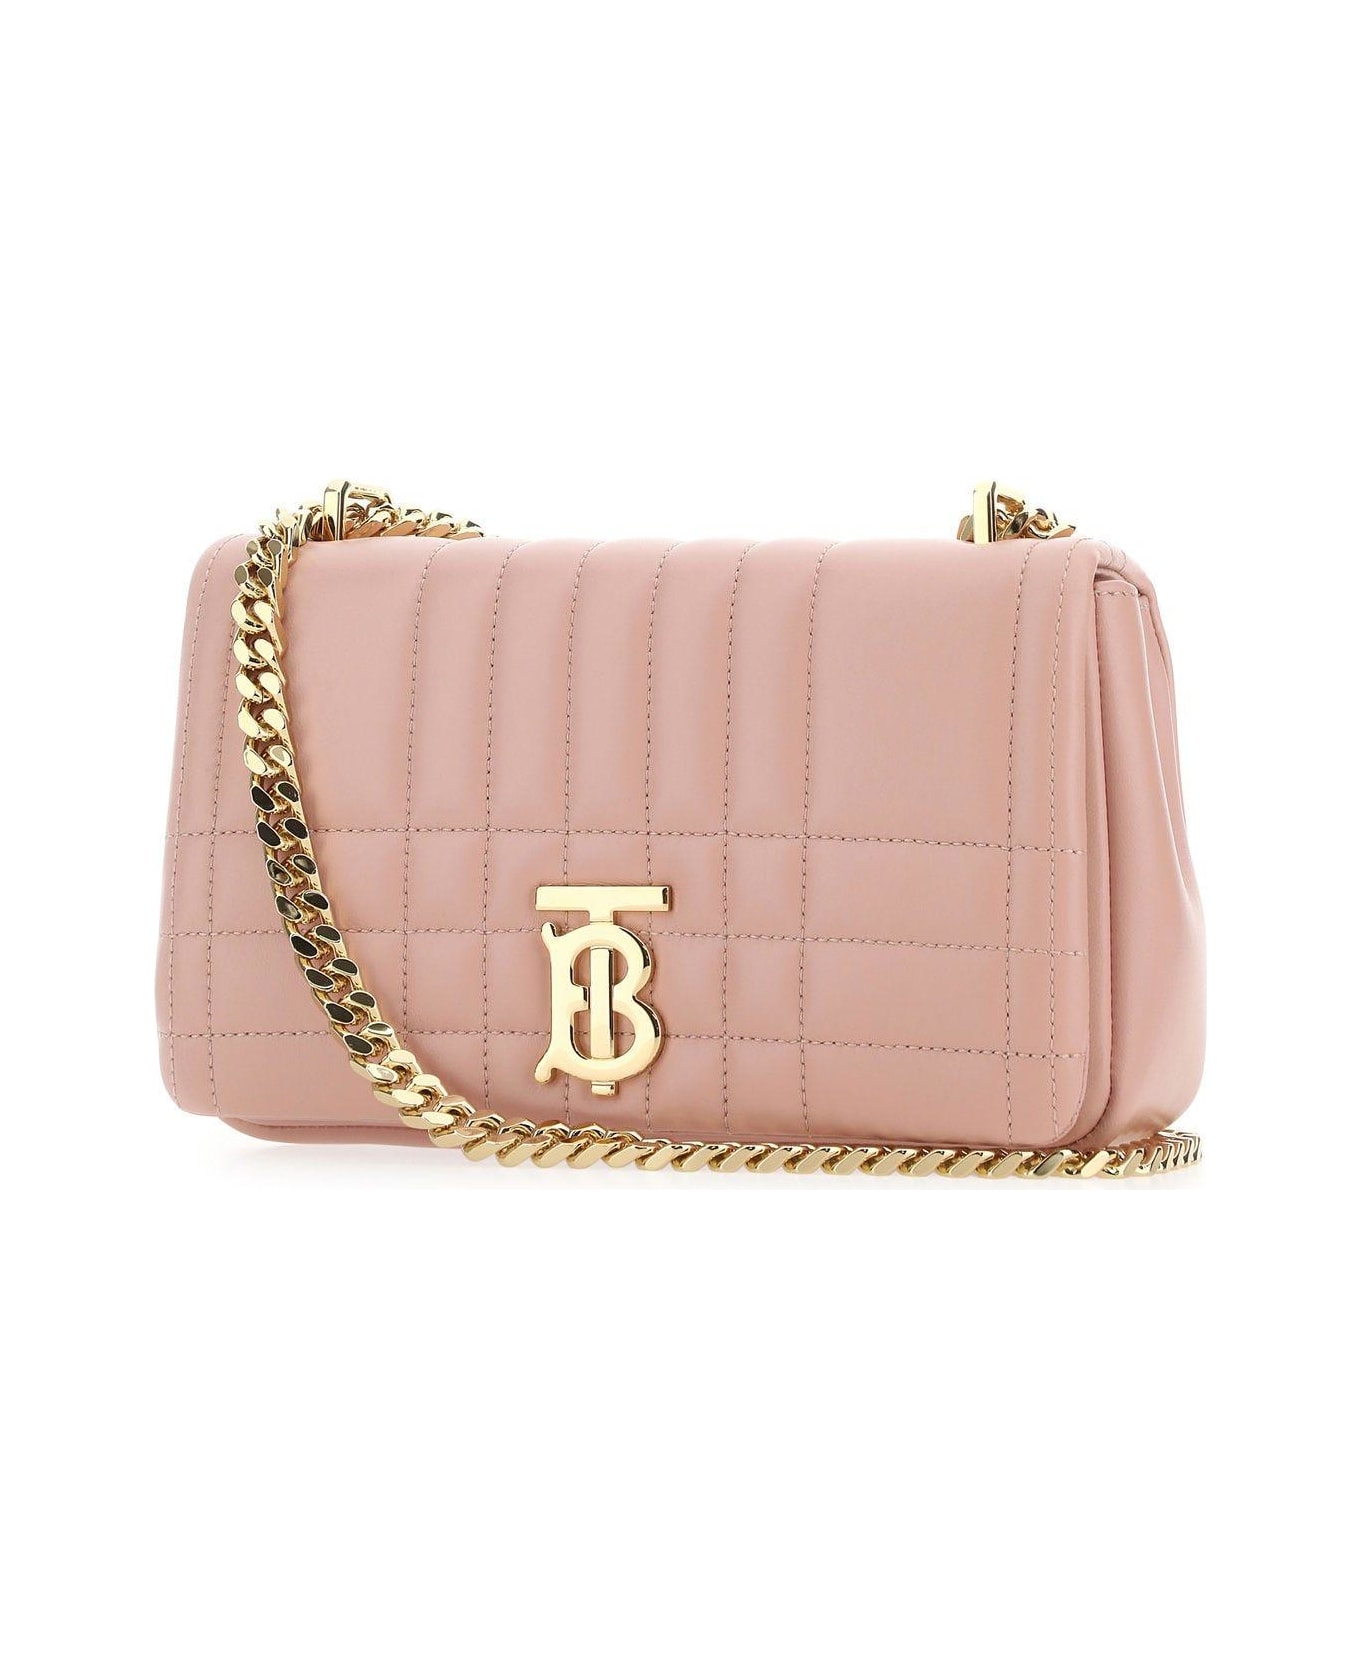 Burberry Pink Nappa Leather Small Lola Shoulder Bag - PINK